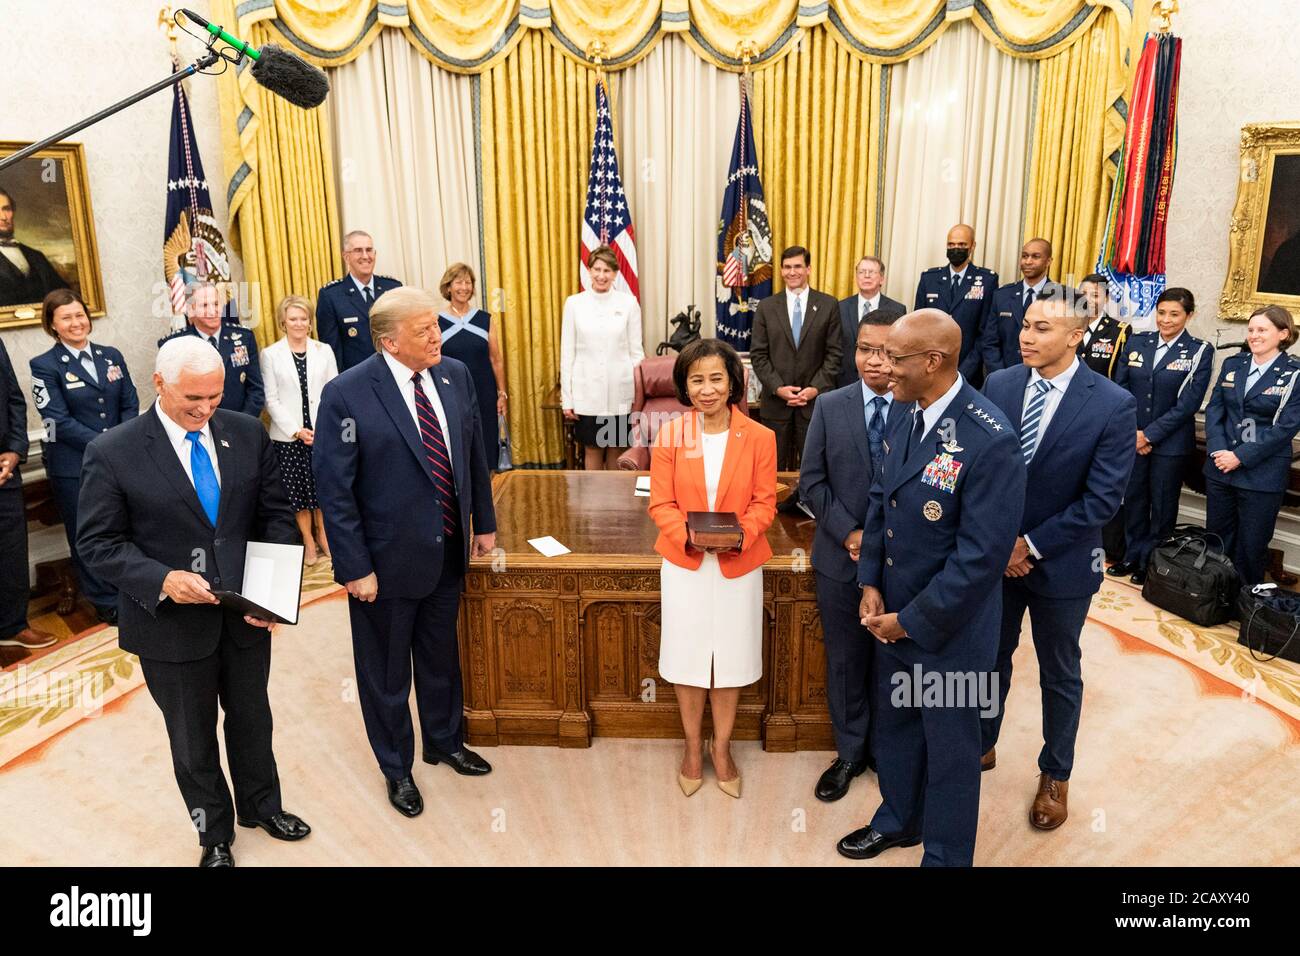 U.S. President Donald Trump and Vice President Mike Pence swear in Air Force General Charles Q. Brown, as the new Air Force Chief of Staff in the Oval Office Room of the White House August 4, 2020 in Washington, DC. Stock Photo